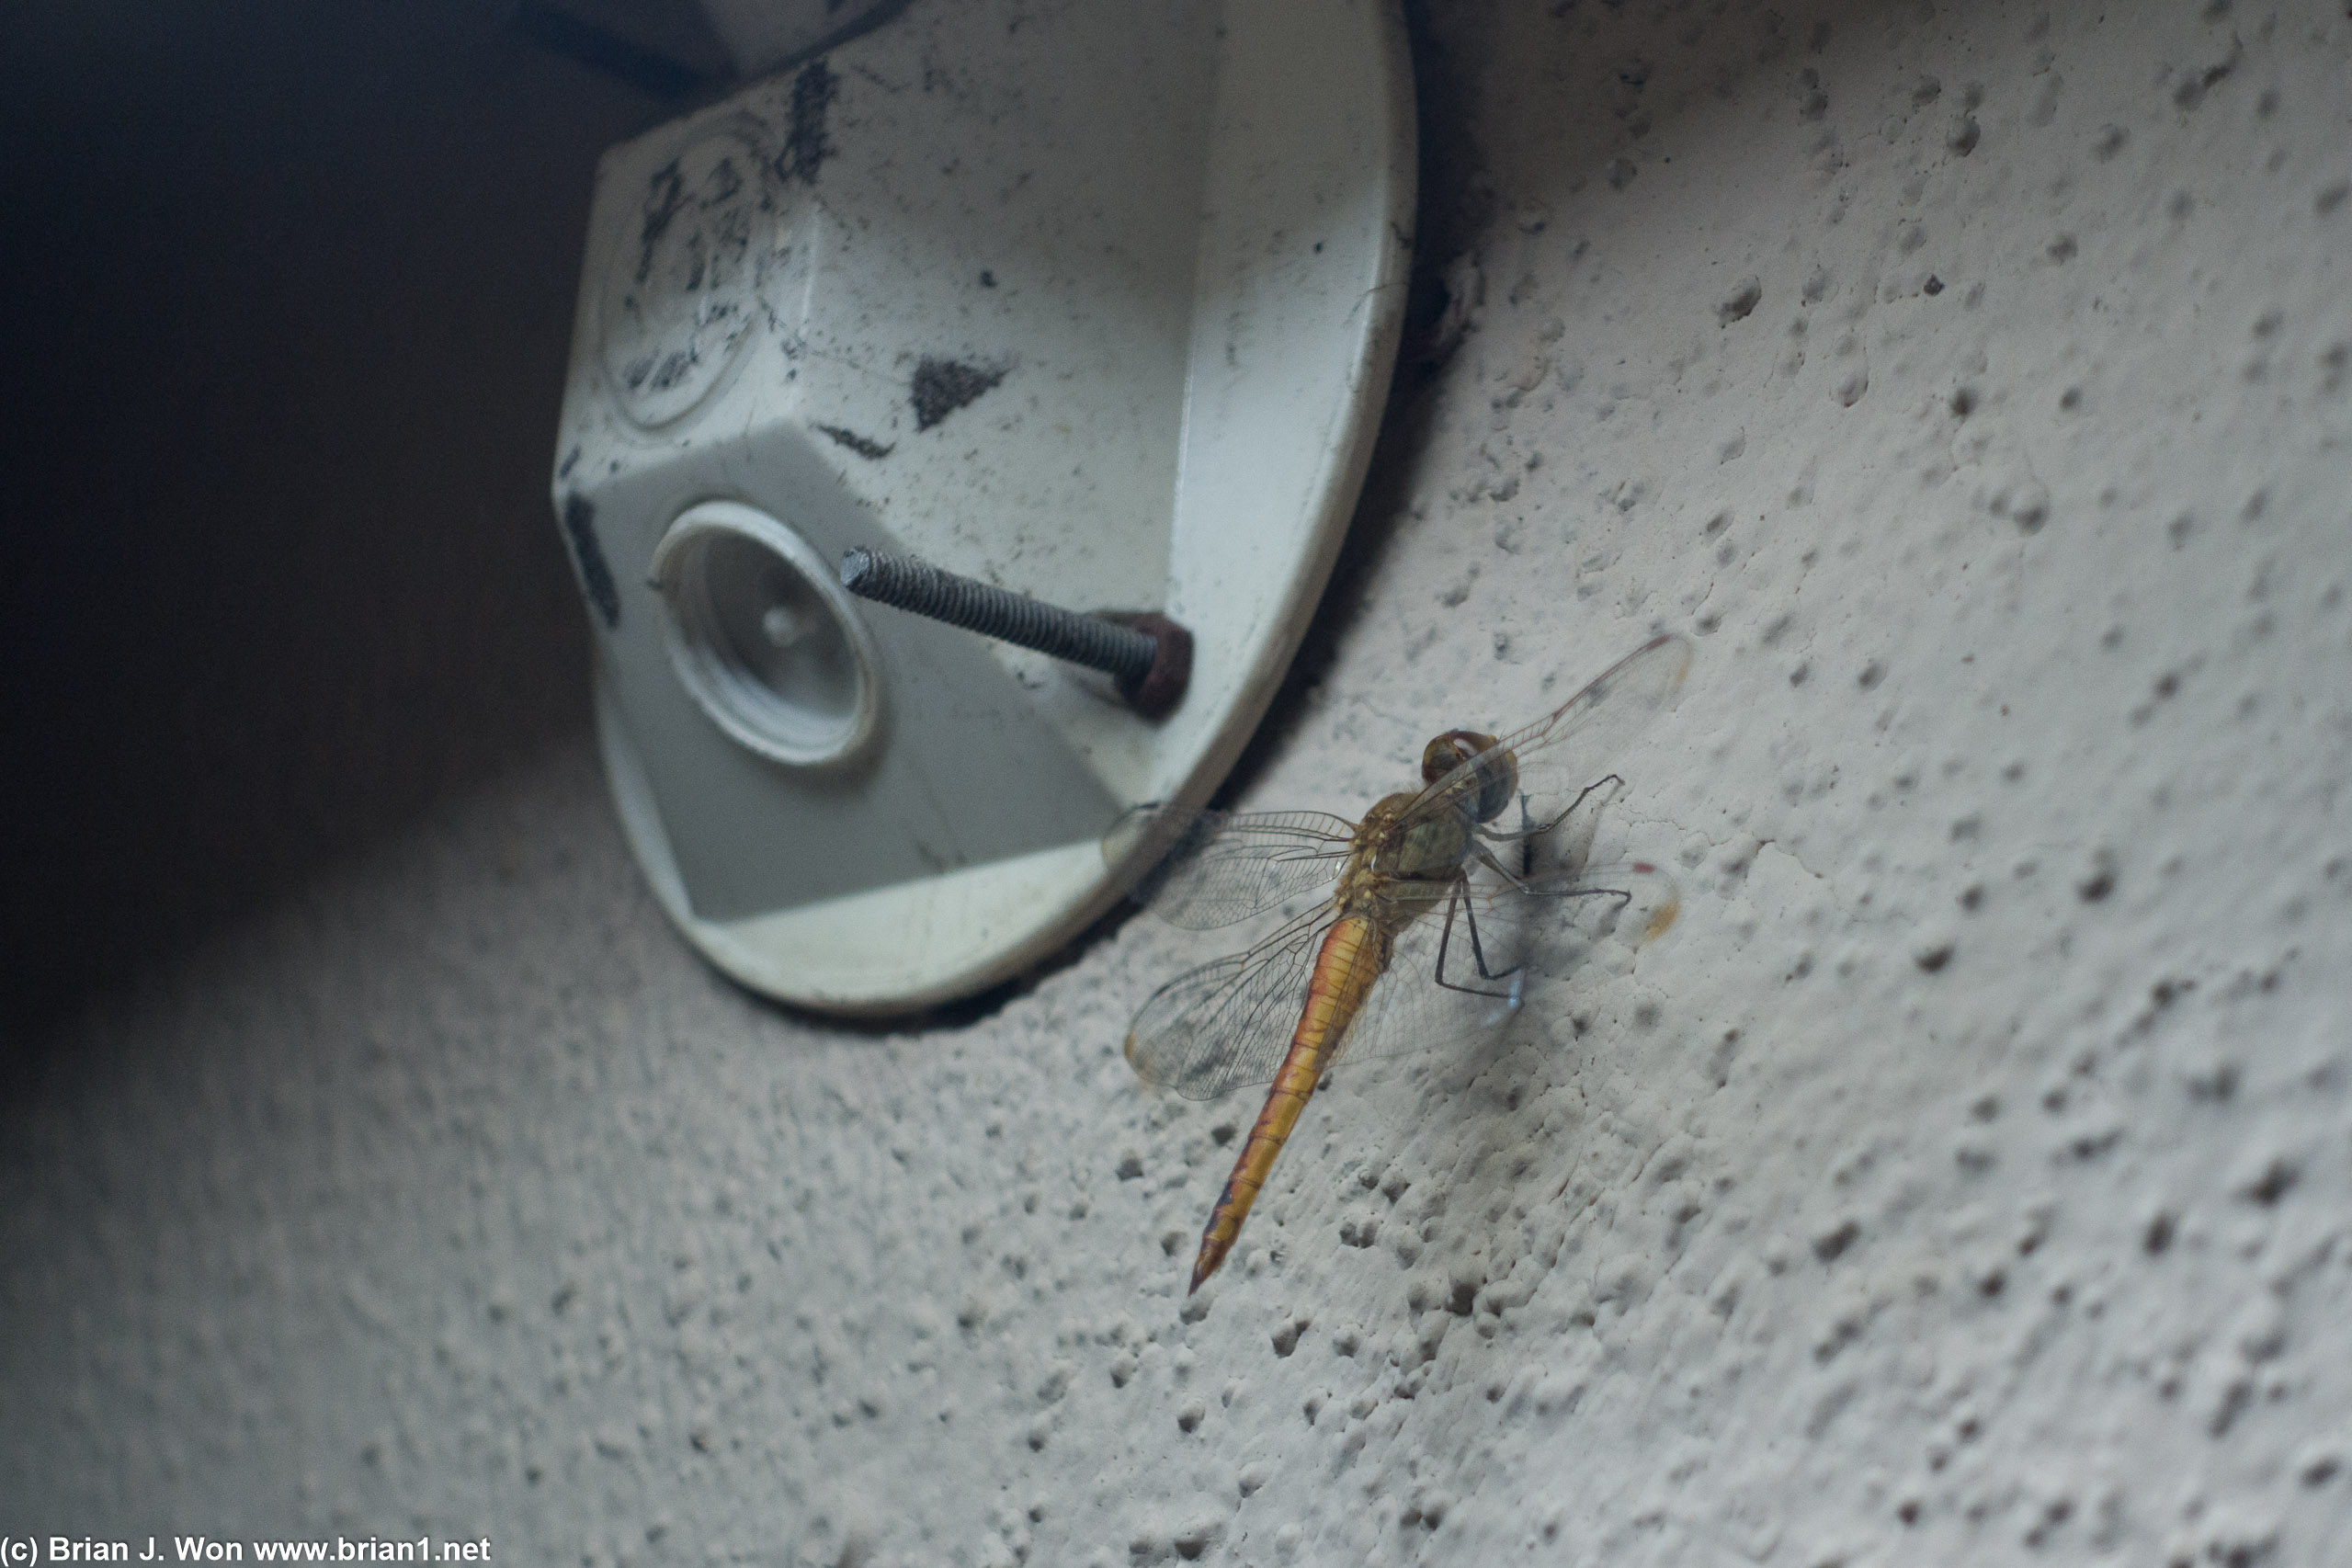 Never expected to see a dragonfly in my little yard!